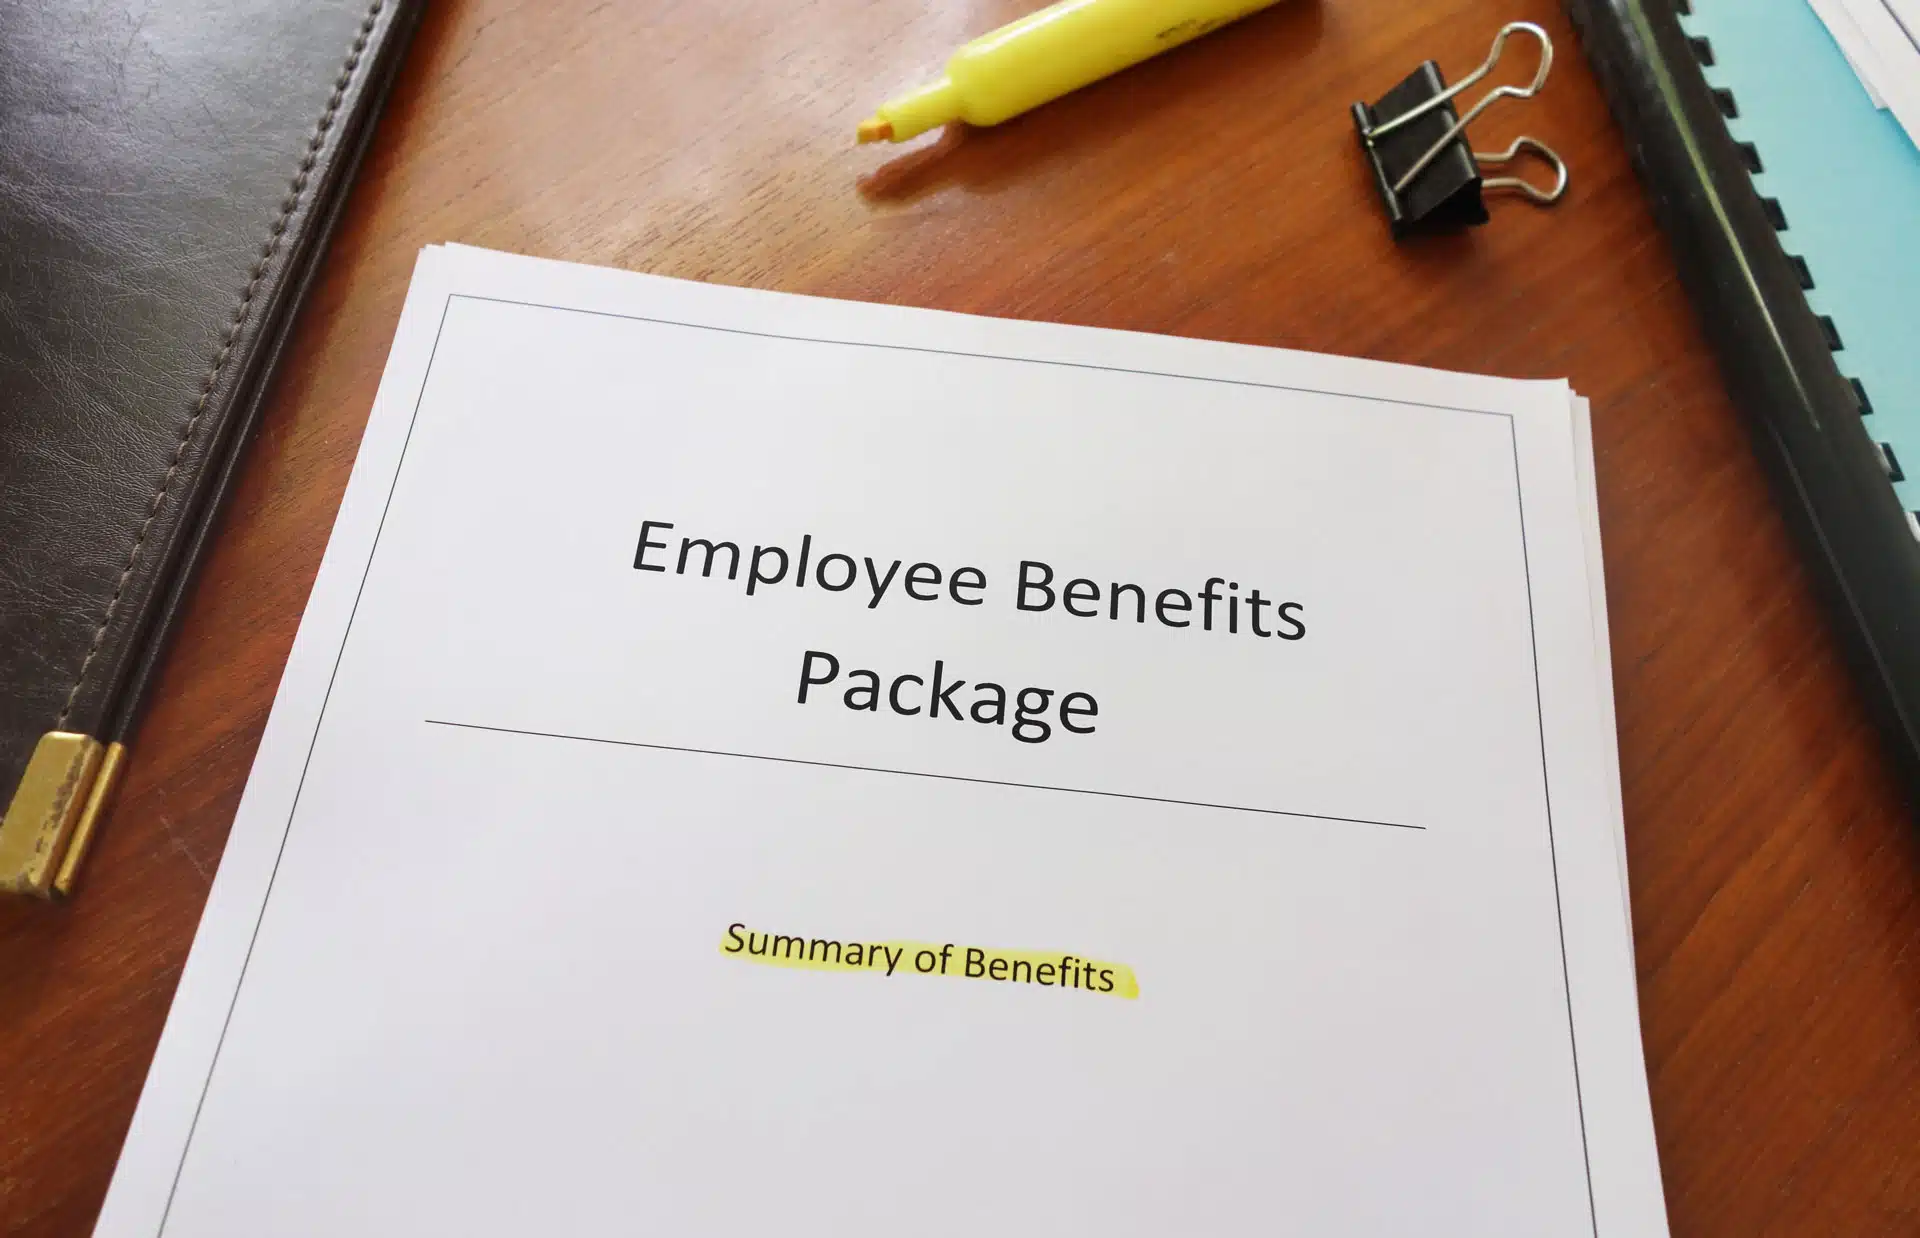 Featured image for “Making the Most of Your Employer-Provided Benefits”